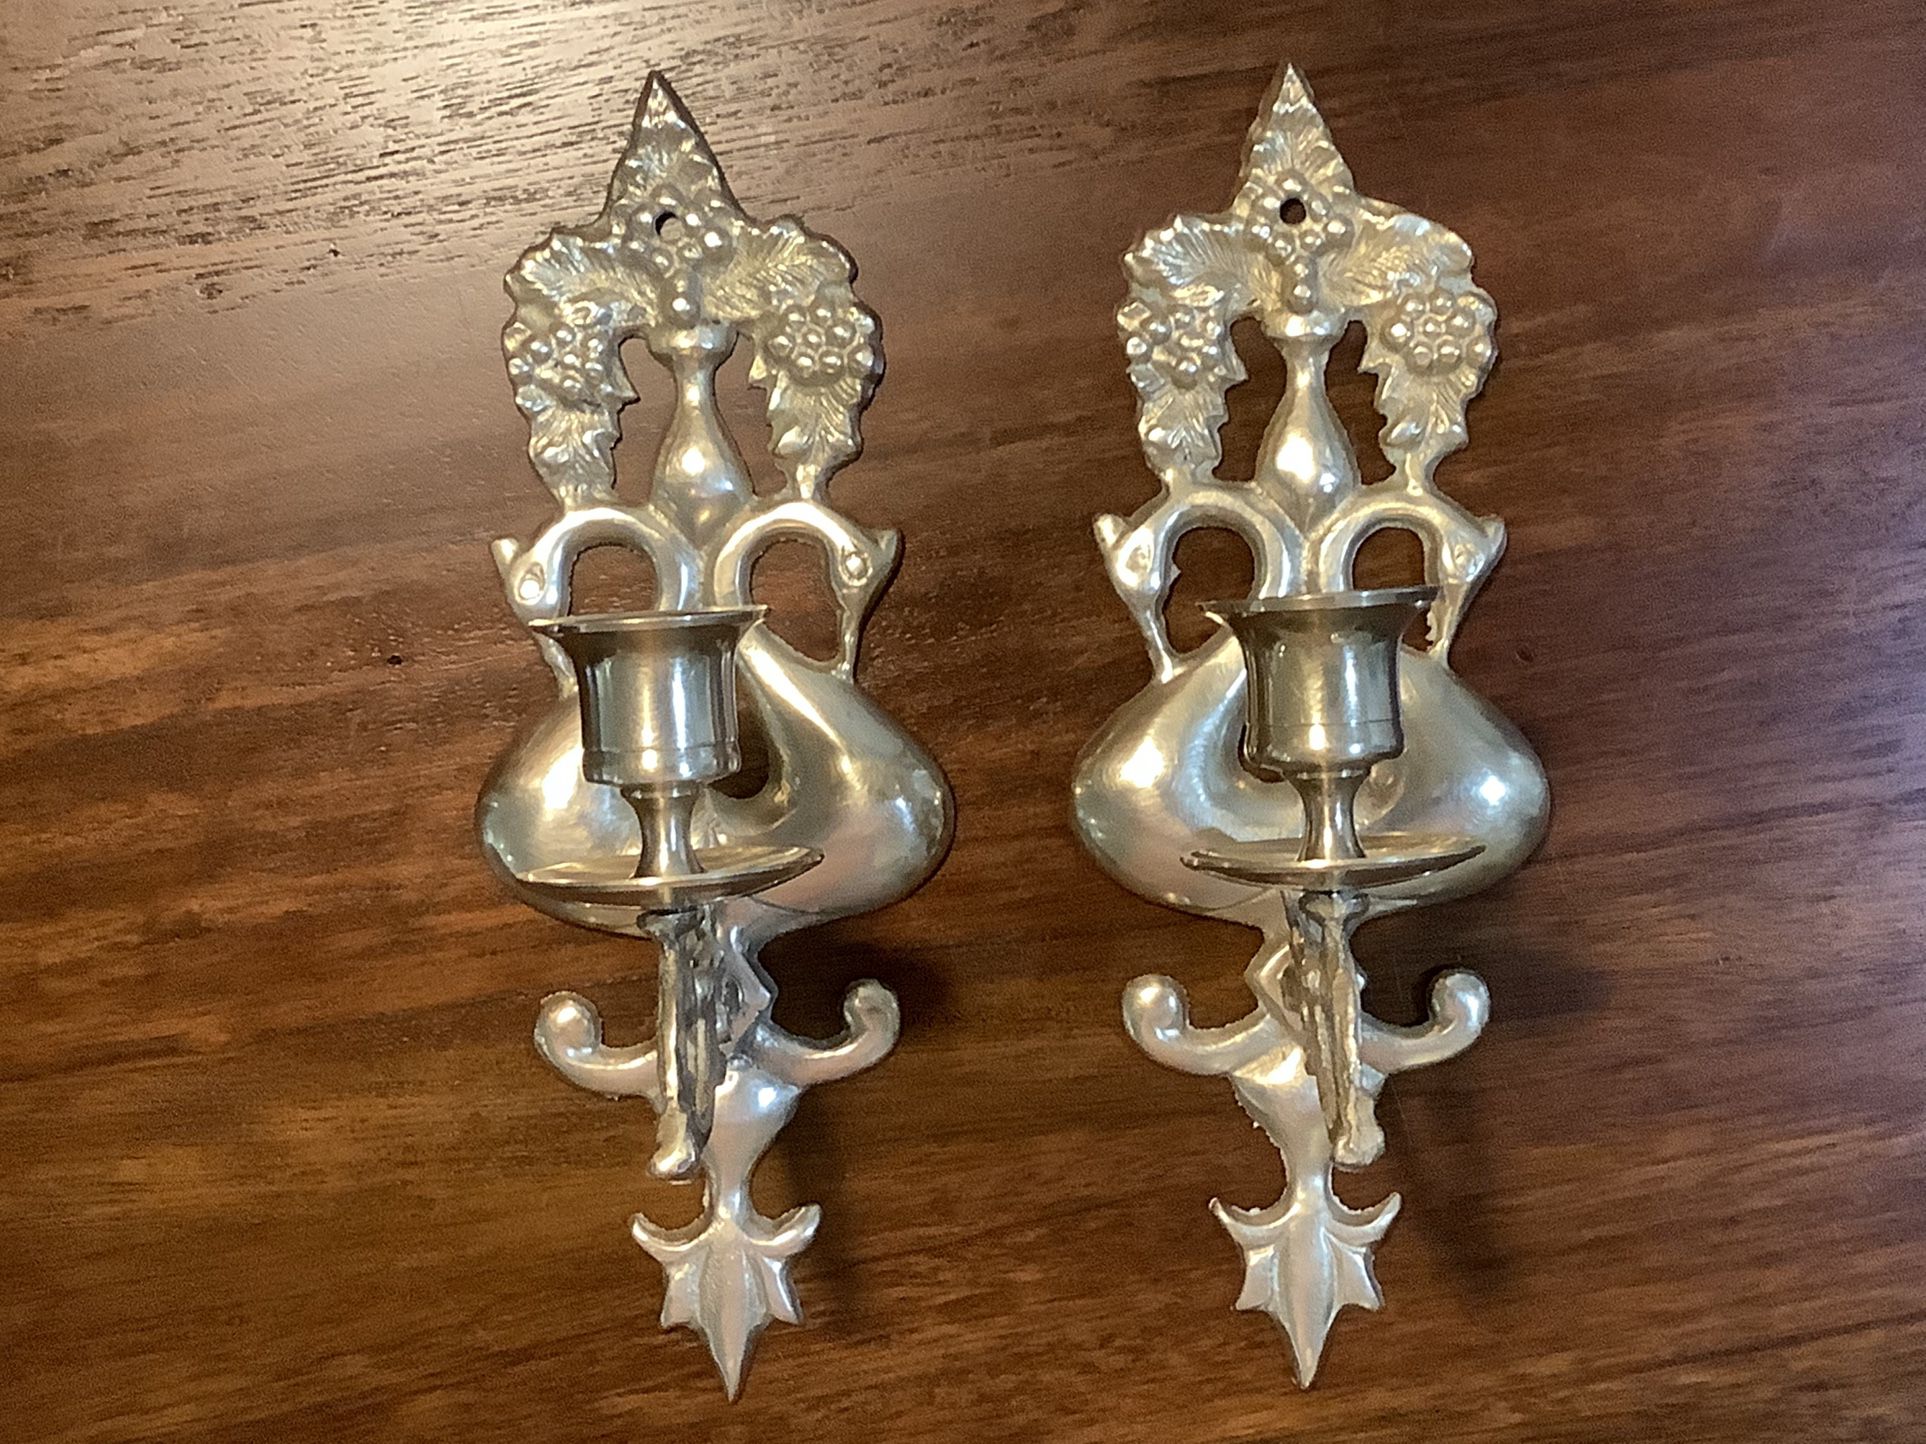 VINTAGE PAIR OF SOLID BRASS SWAN DESIGNED WALL MOUNT CANDLESTICK HOLDERS